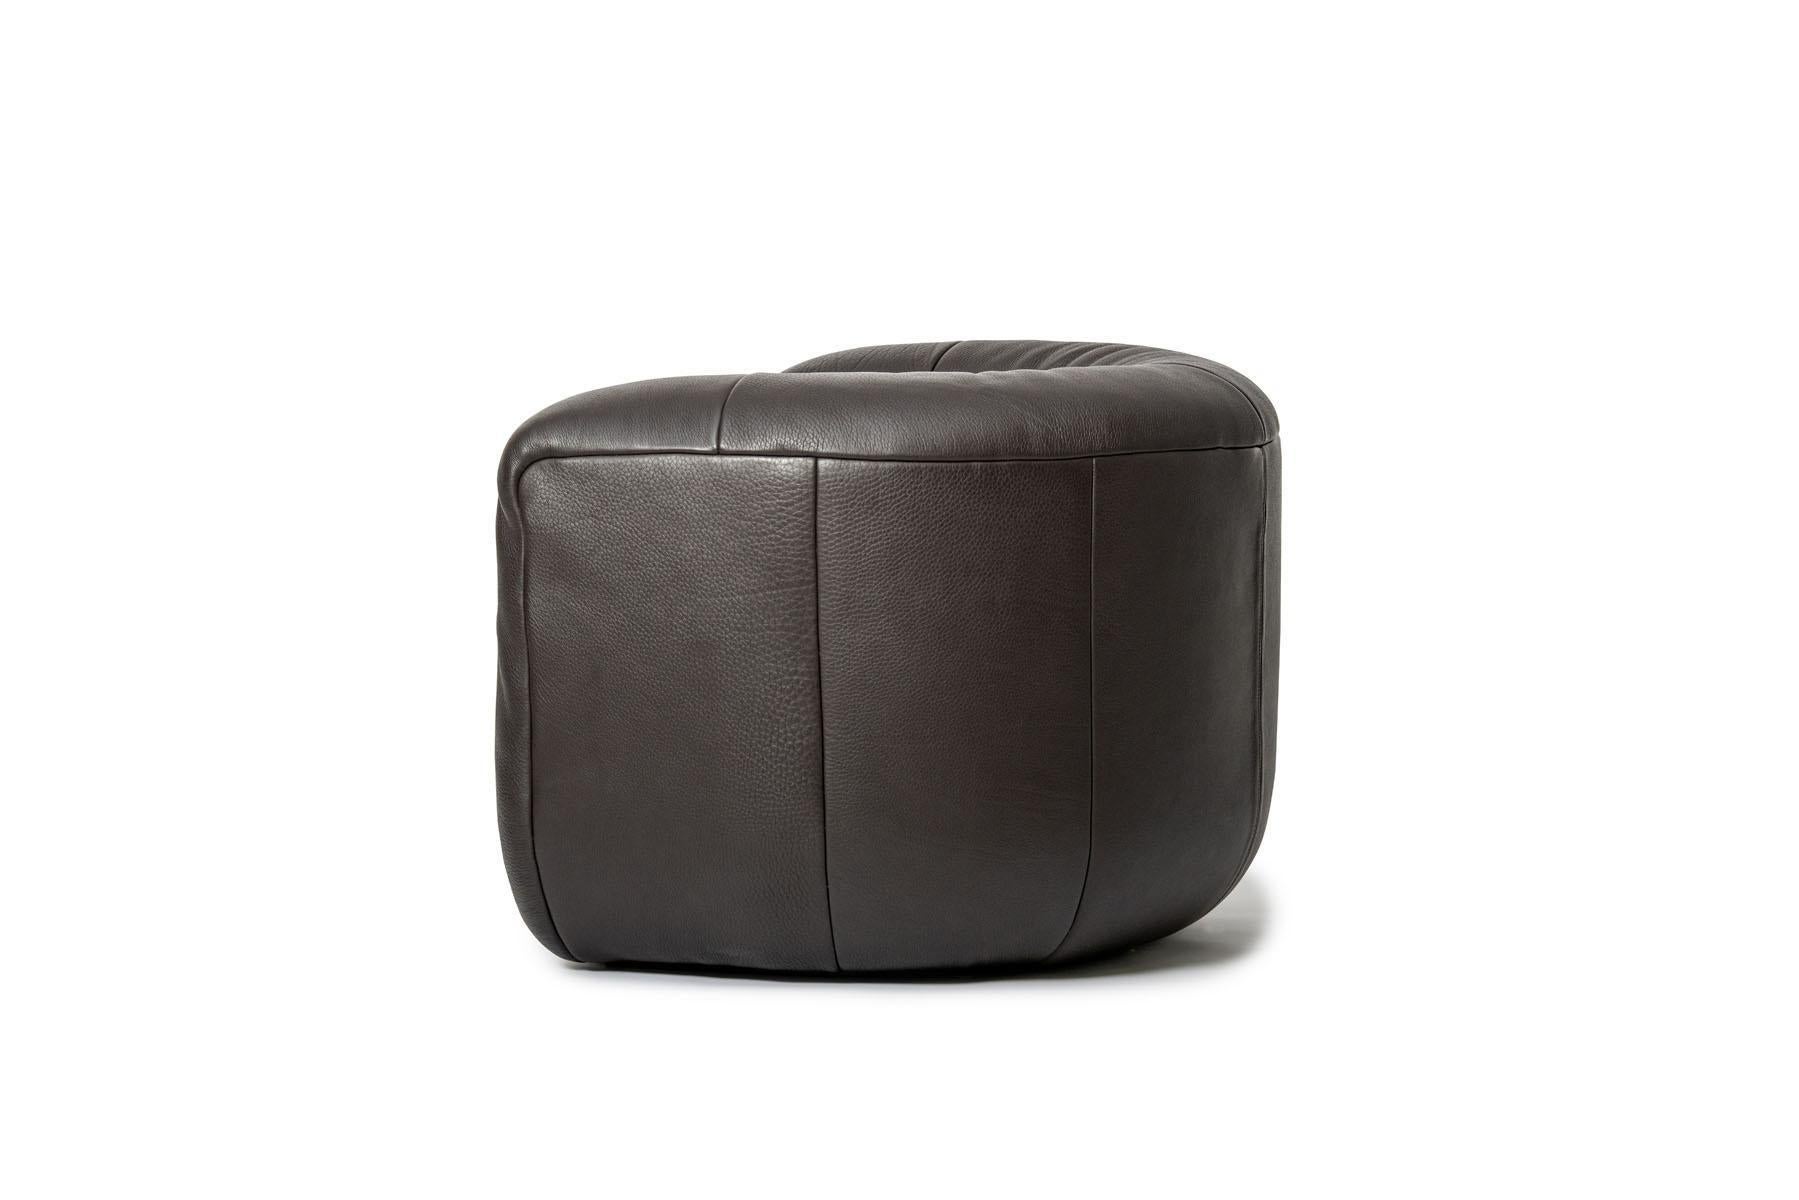 Contemporary De Sede DS-707 Armchair in Black Club Leather Upholstery by Philippe Malouin For Sale